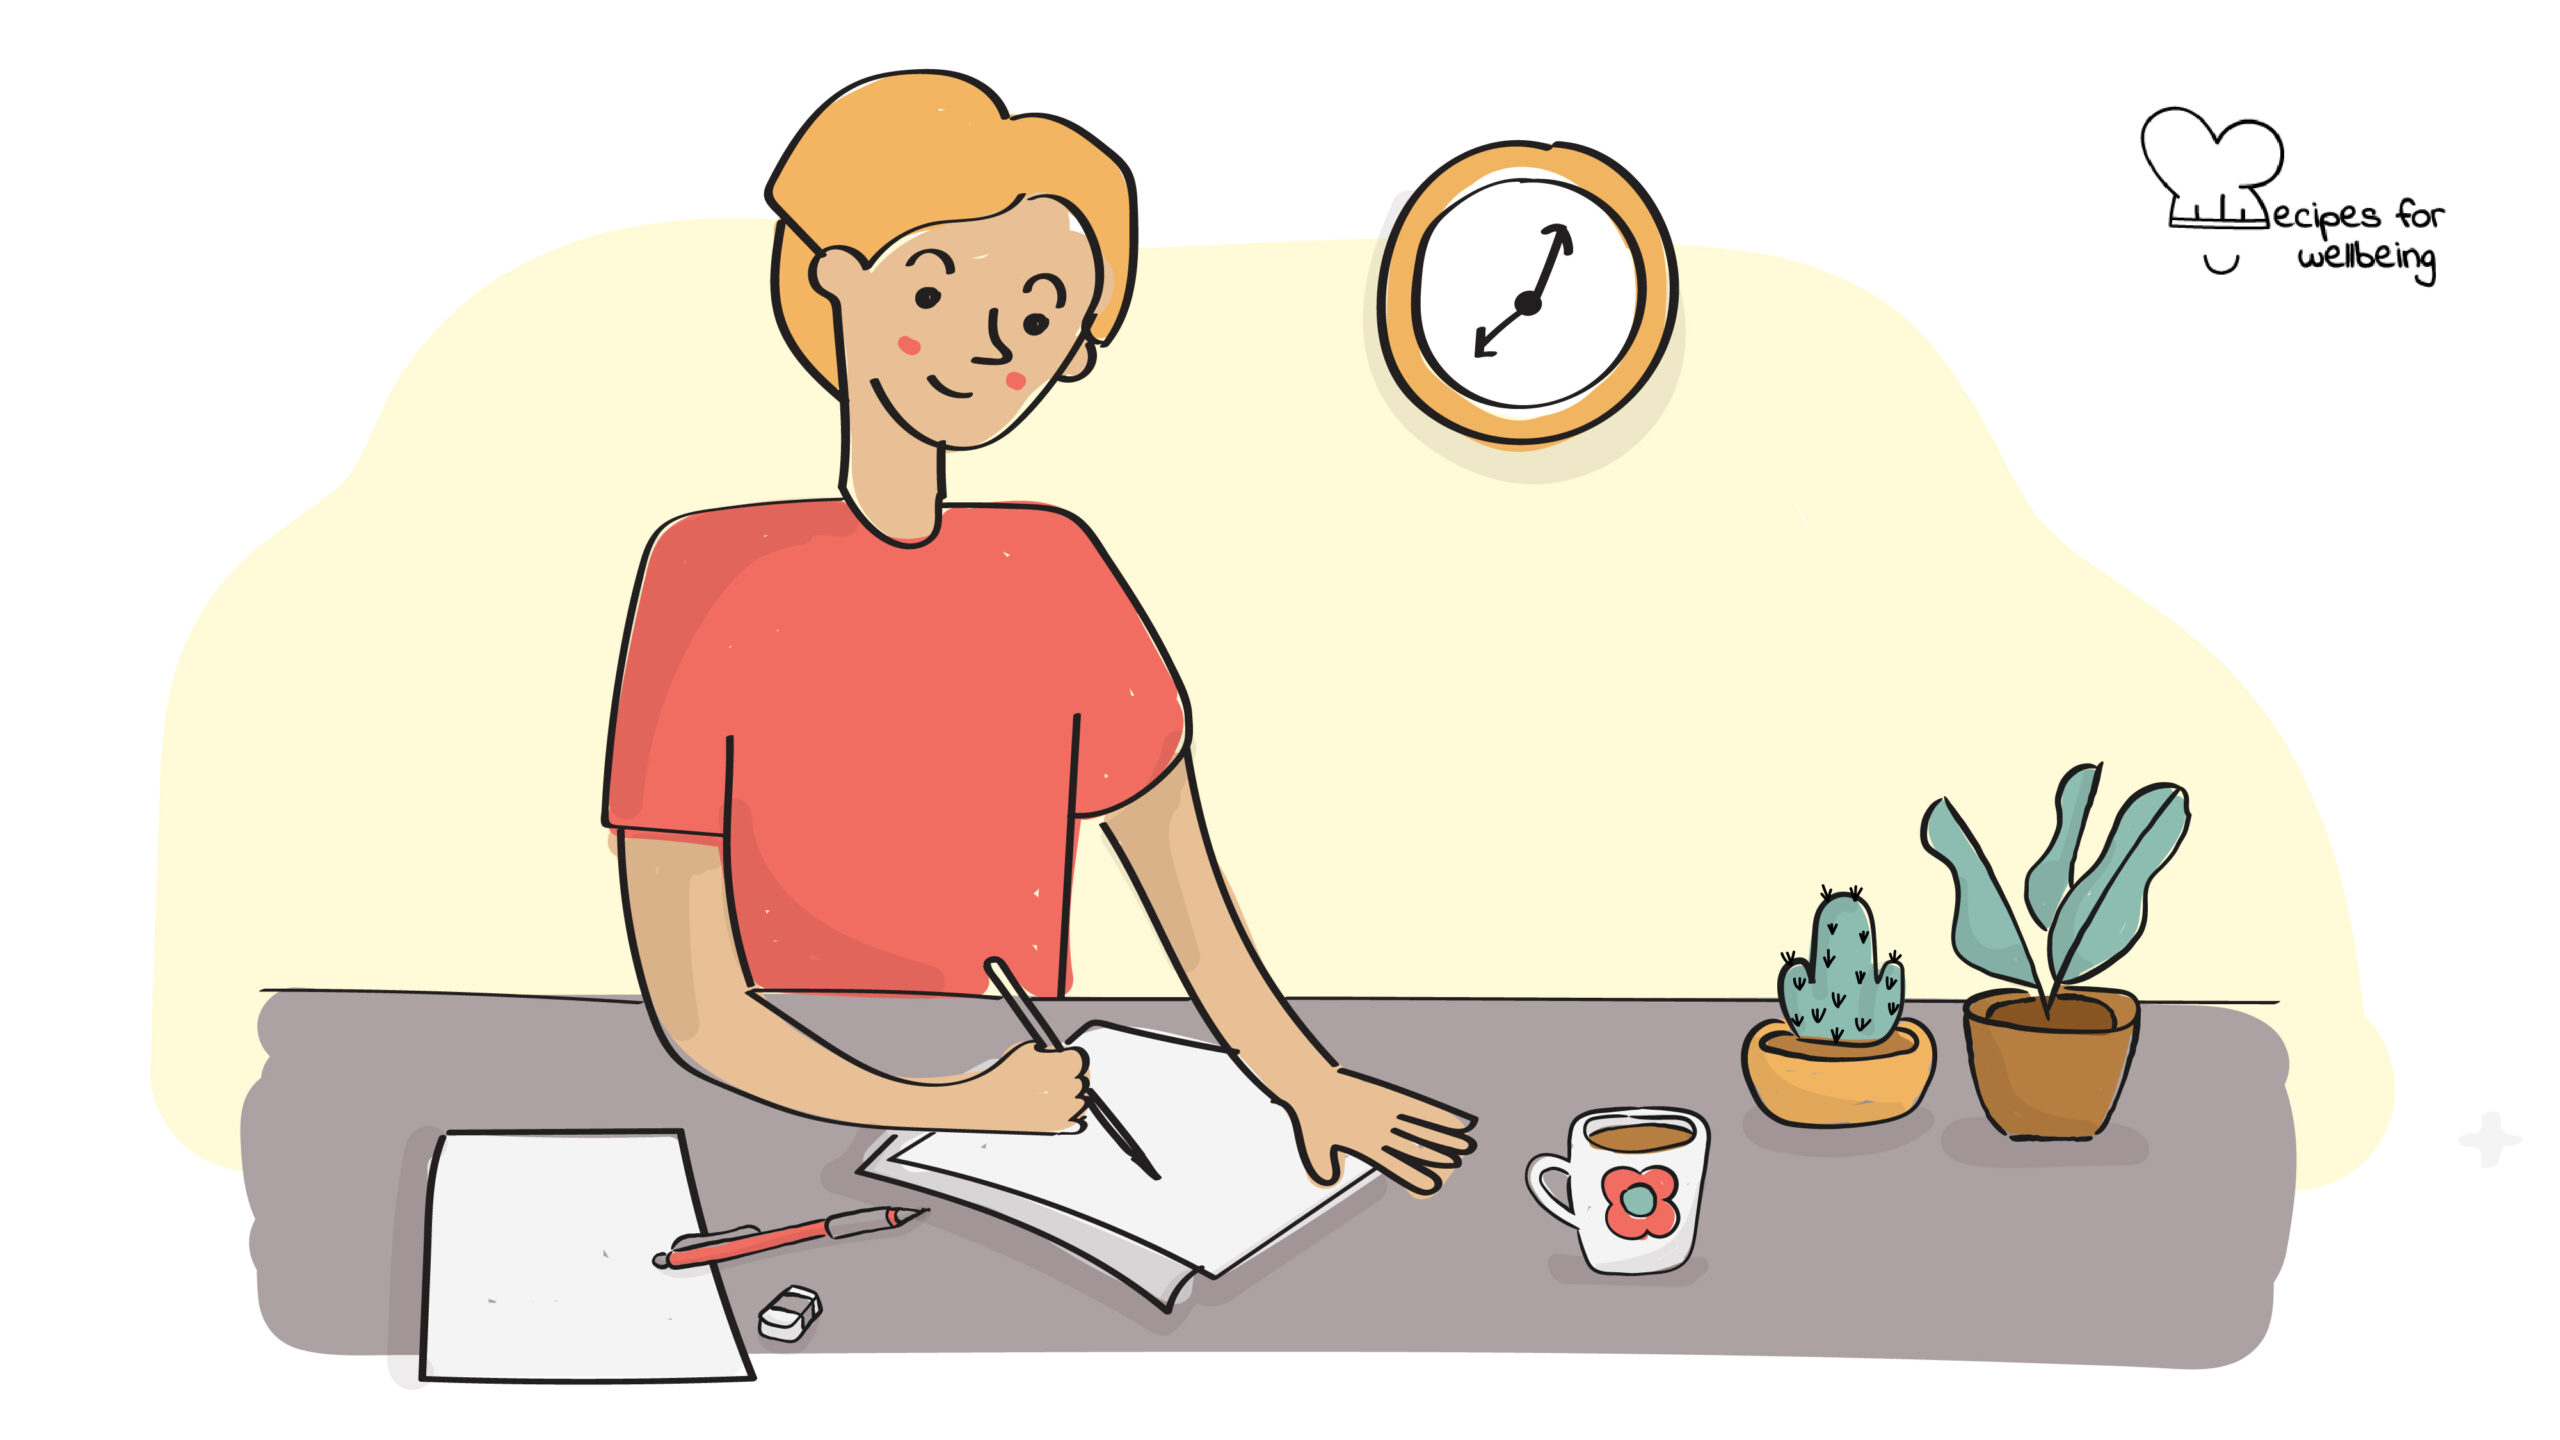 Illustration of a person sitting and reflecting by writing on a sheet of paper. © Recipes for Wellbeing